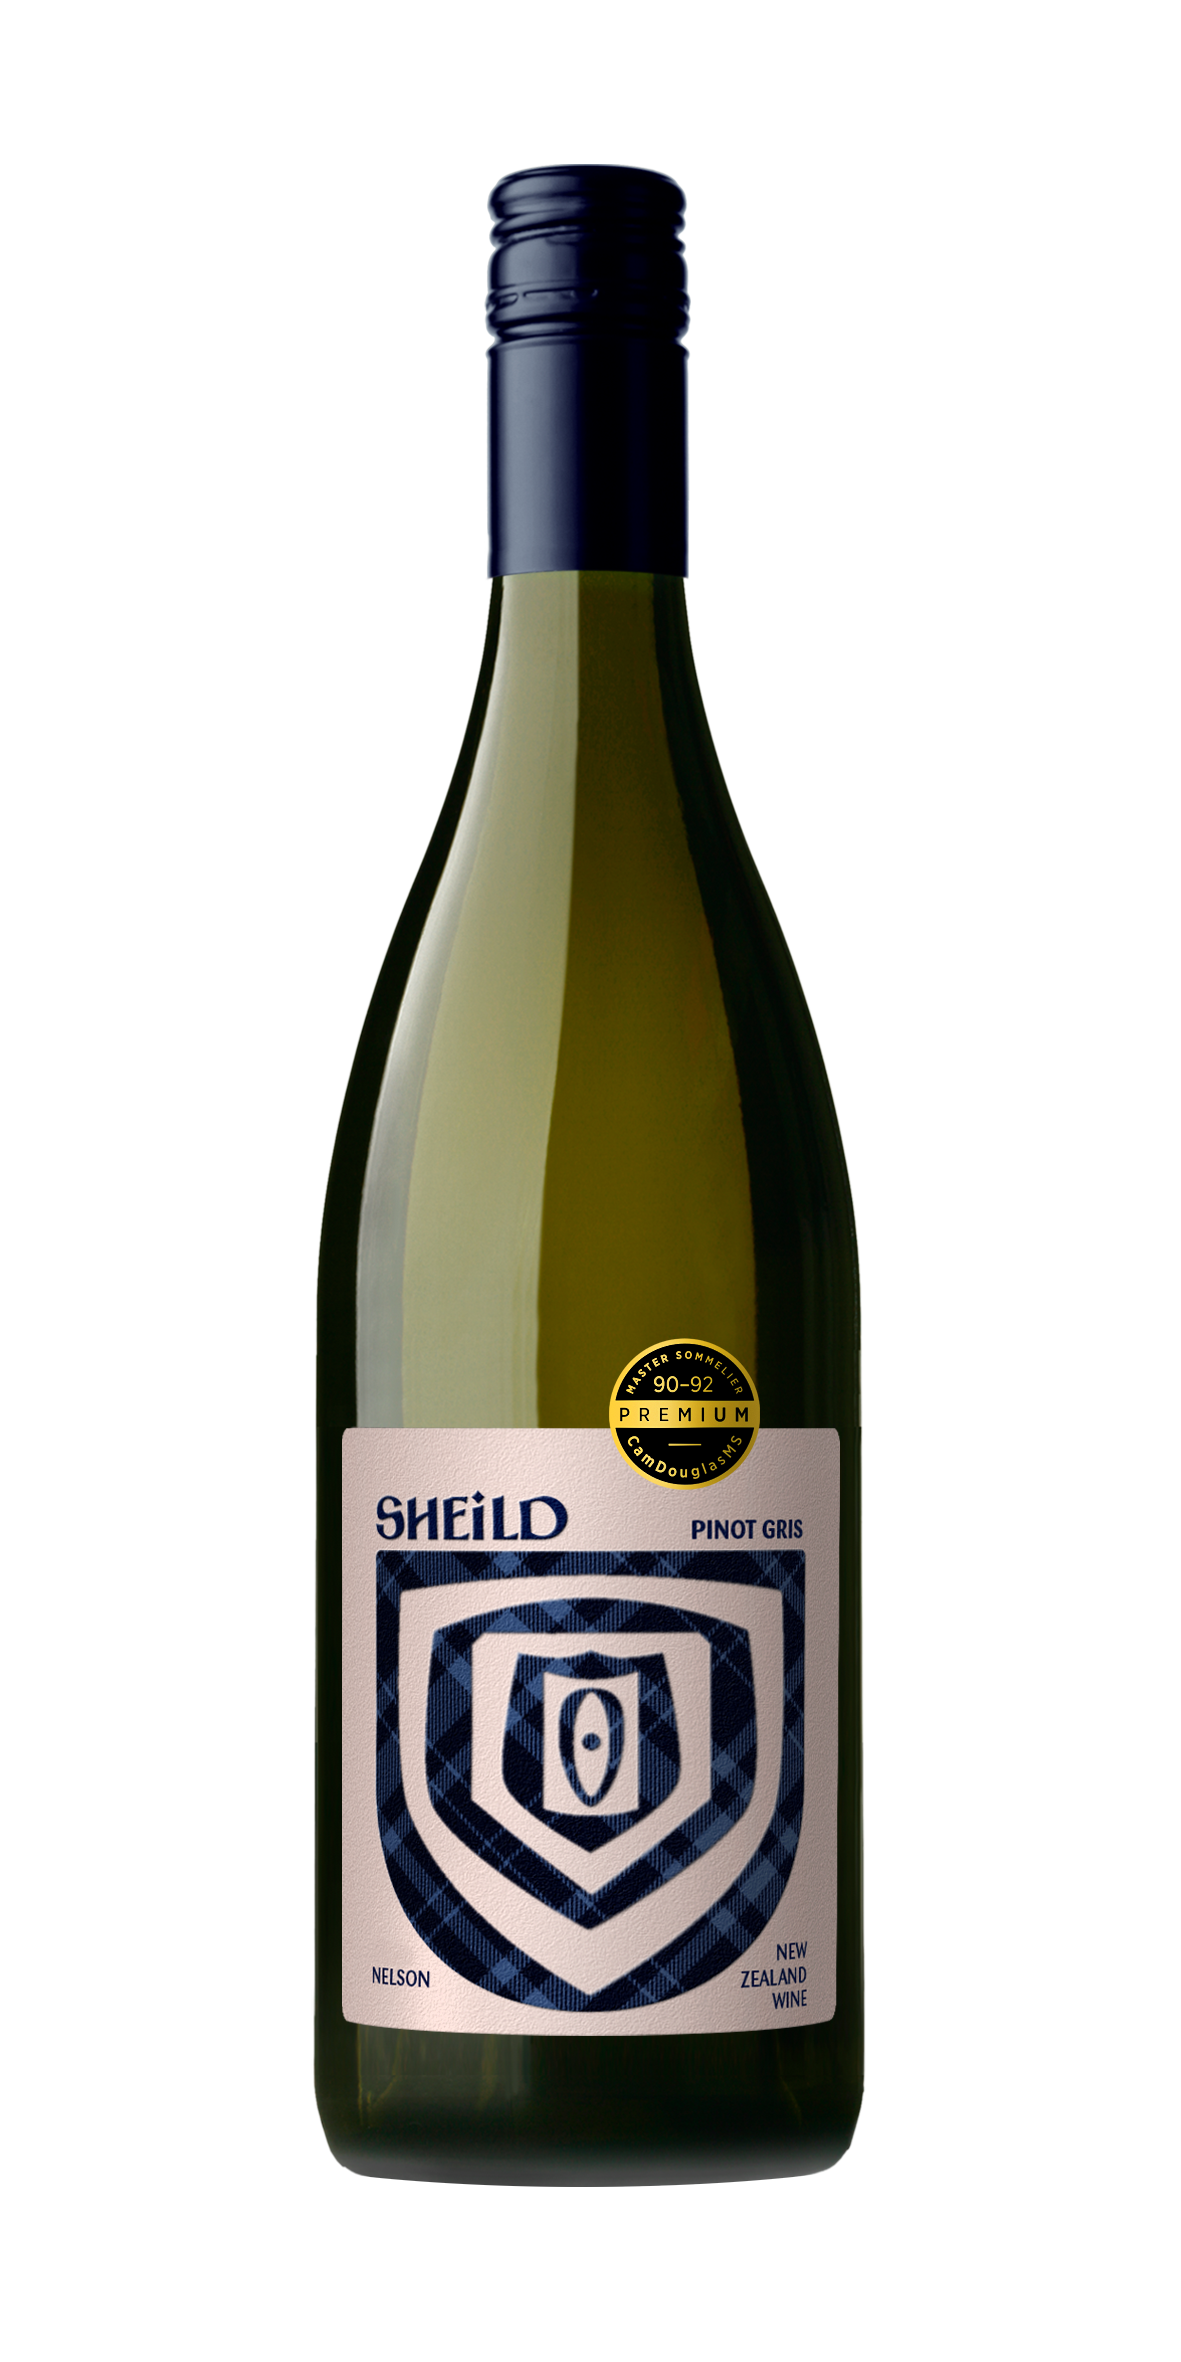 Bottle of SHEiLD's Pinot Gris wine, with pink label and dark blue cap/logo. Cam Douglas award badge, 90-92/100 points.